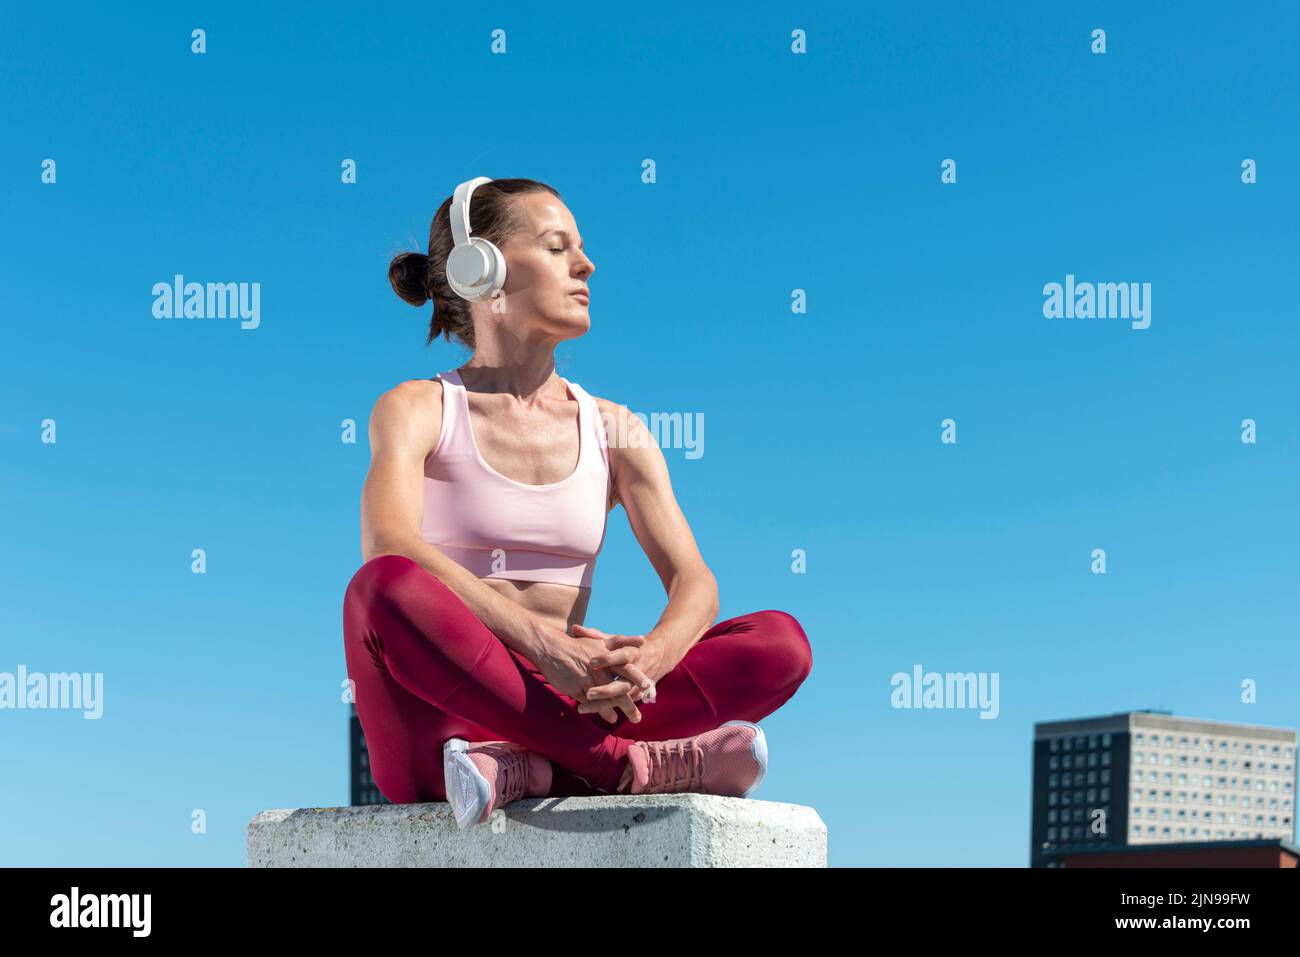 attractive fit woman sitting crossed legged slistening to music with headphones outdoors in the sun, urban setting. Stock Photo